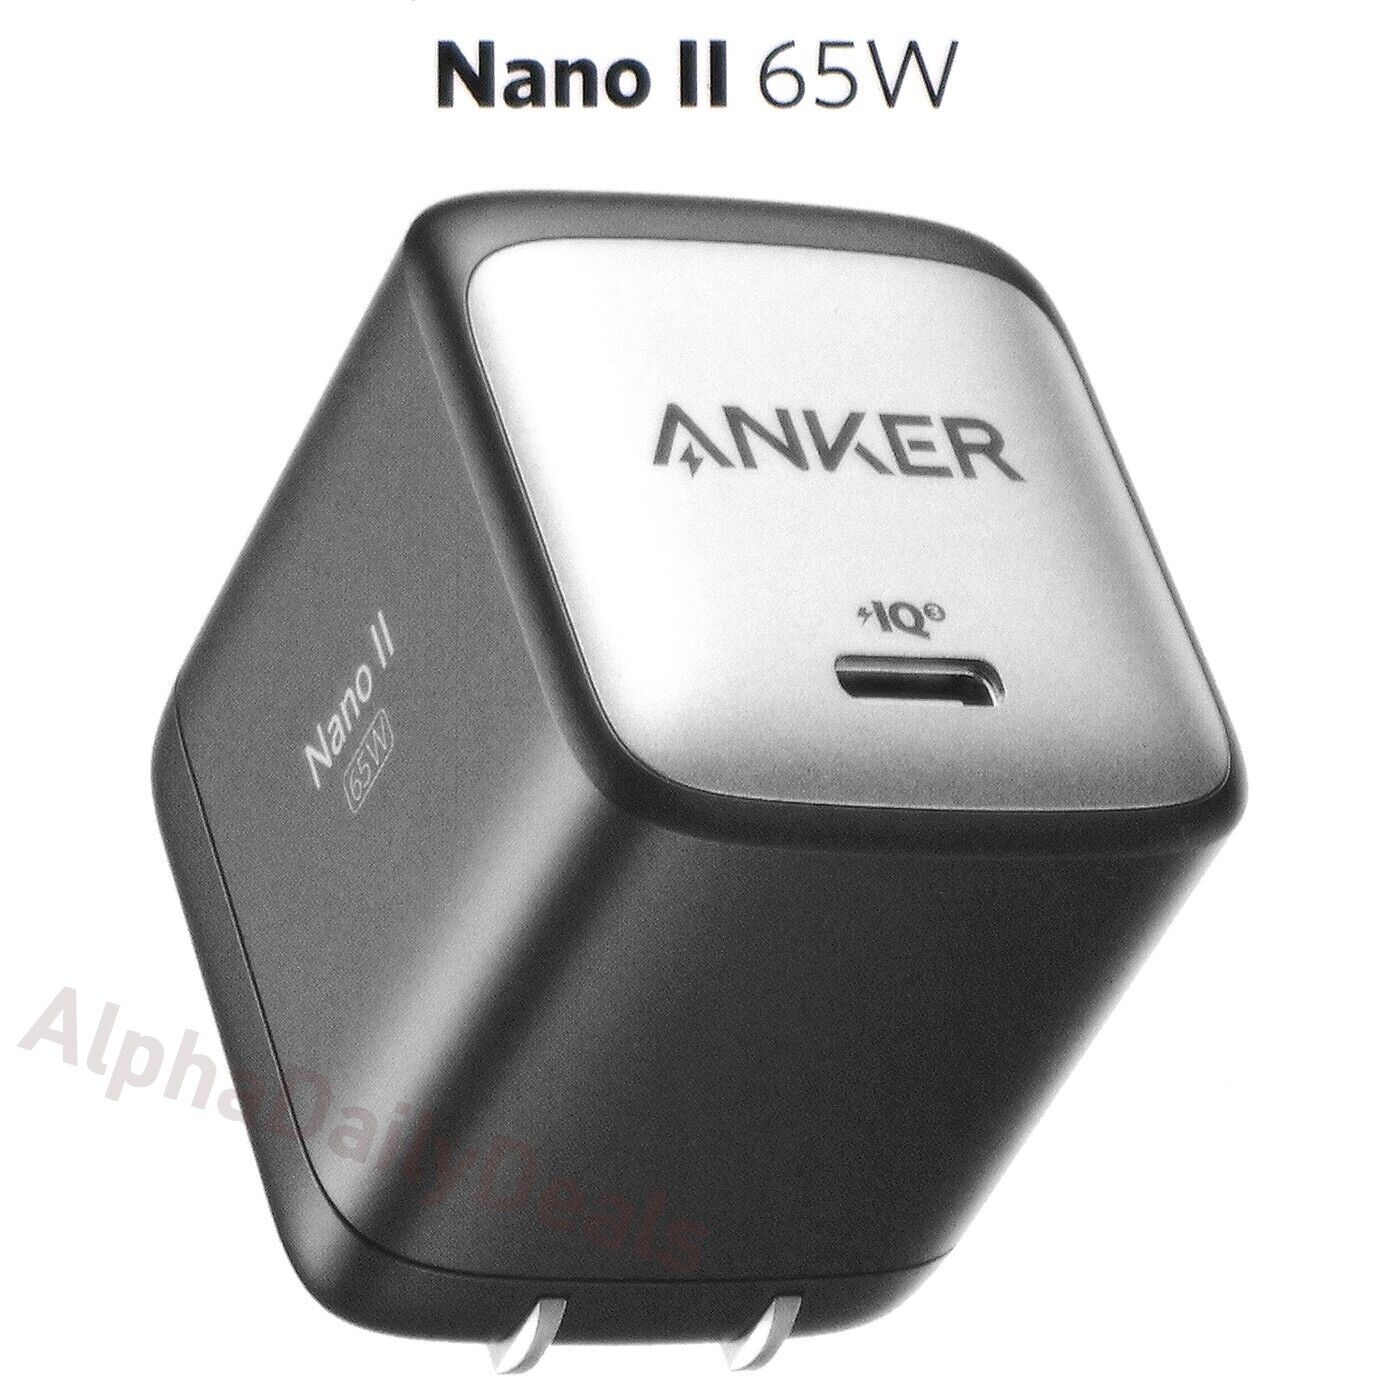 NEW Anker Nano II 65W USB-C Fast Wall Charger Adapter for Laptop Macbook Pro Air